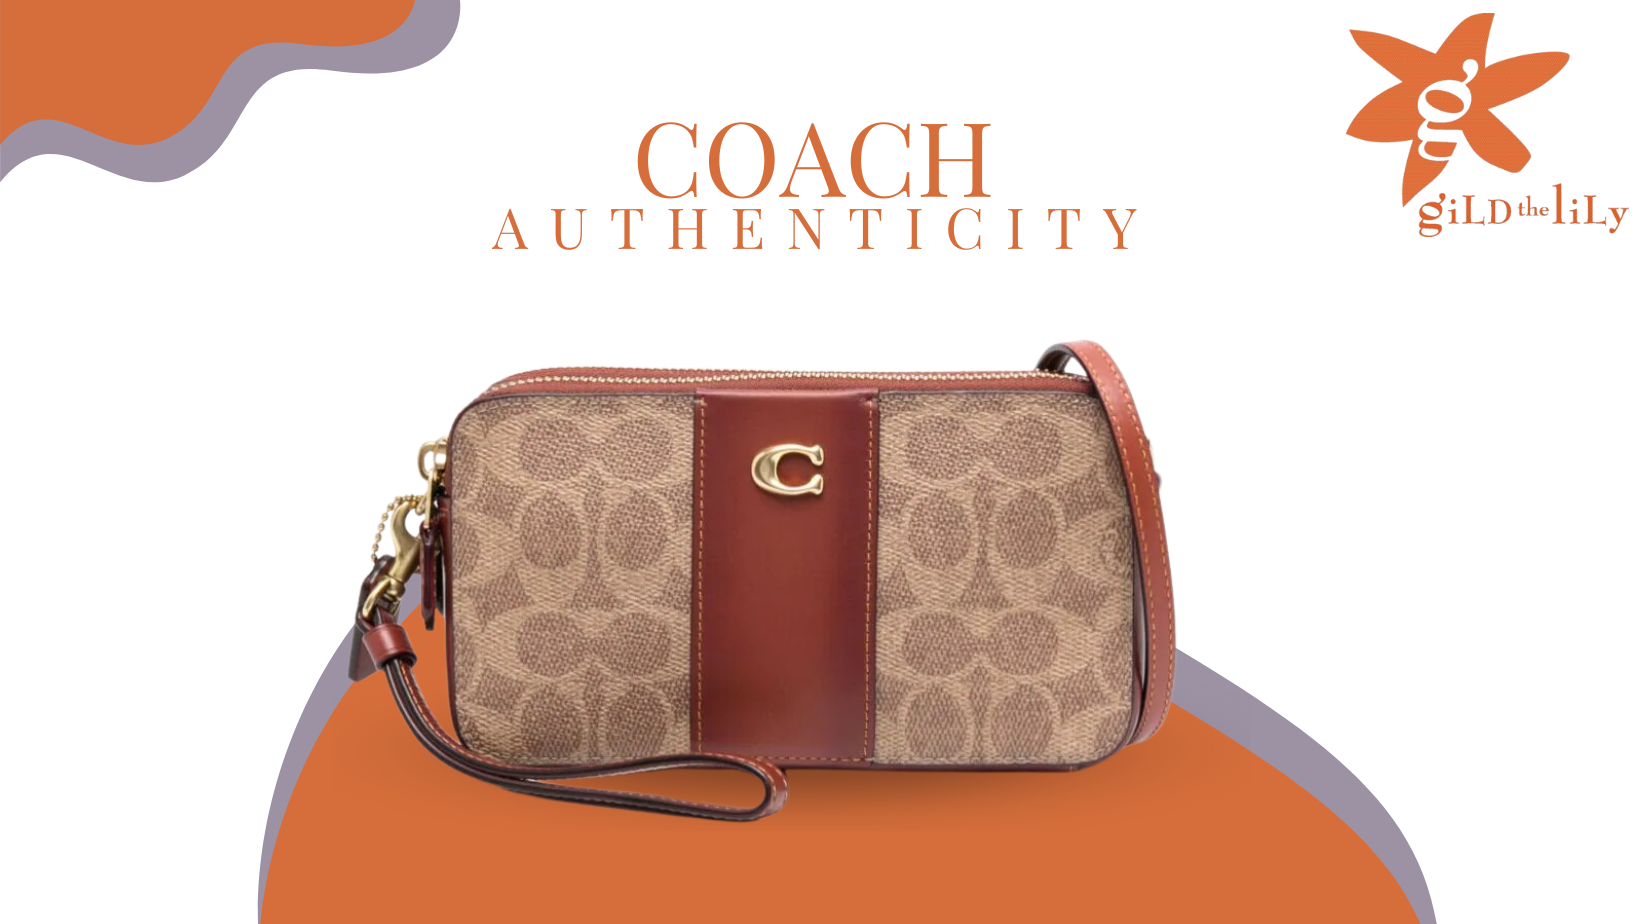 AUTHENTIC COACH HANDBAG - clothing & accessories - by owner - apparel sale  - craigslist